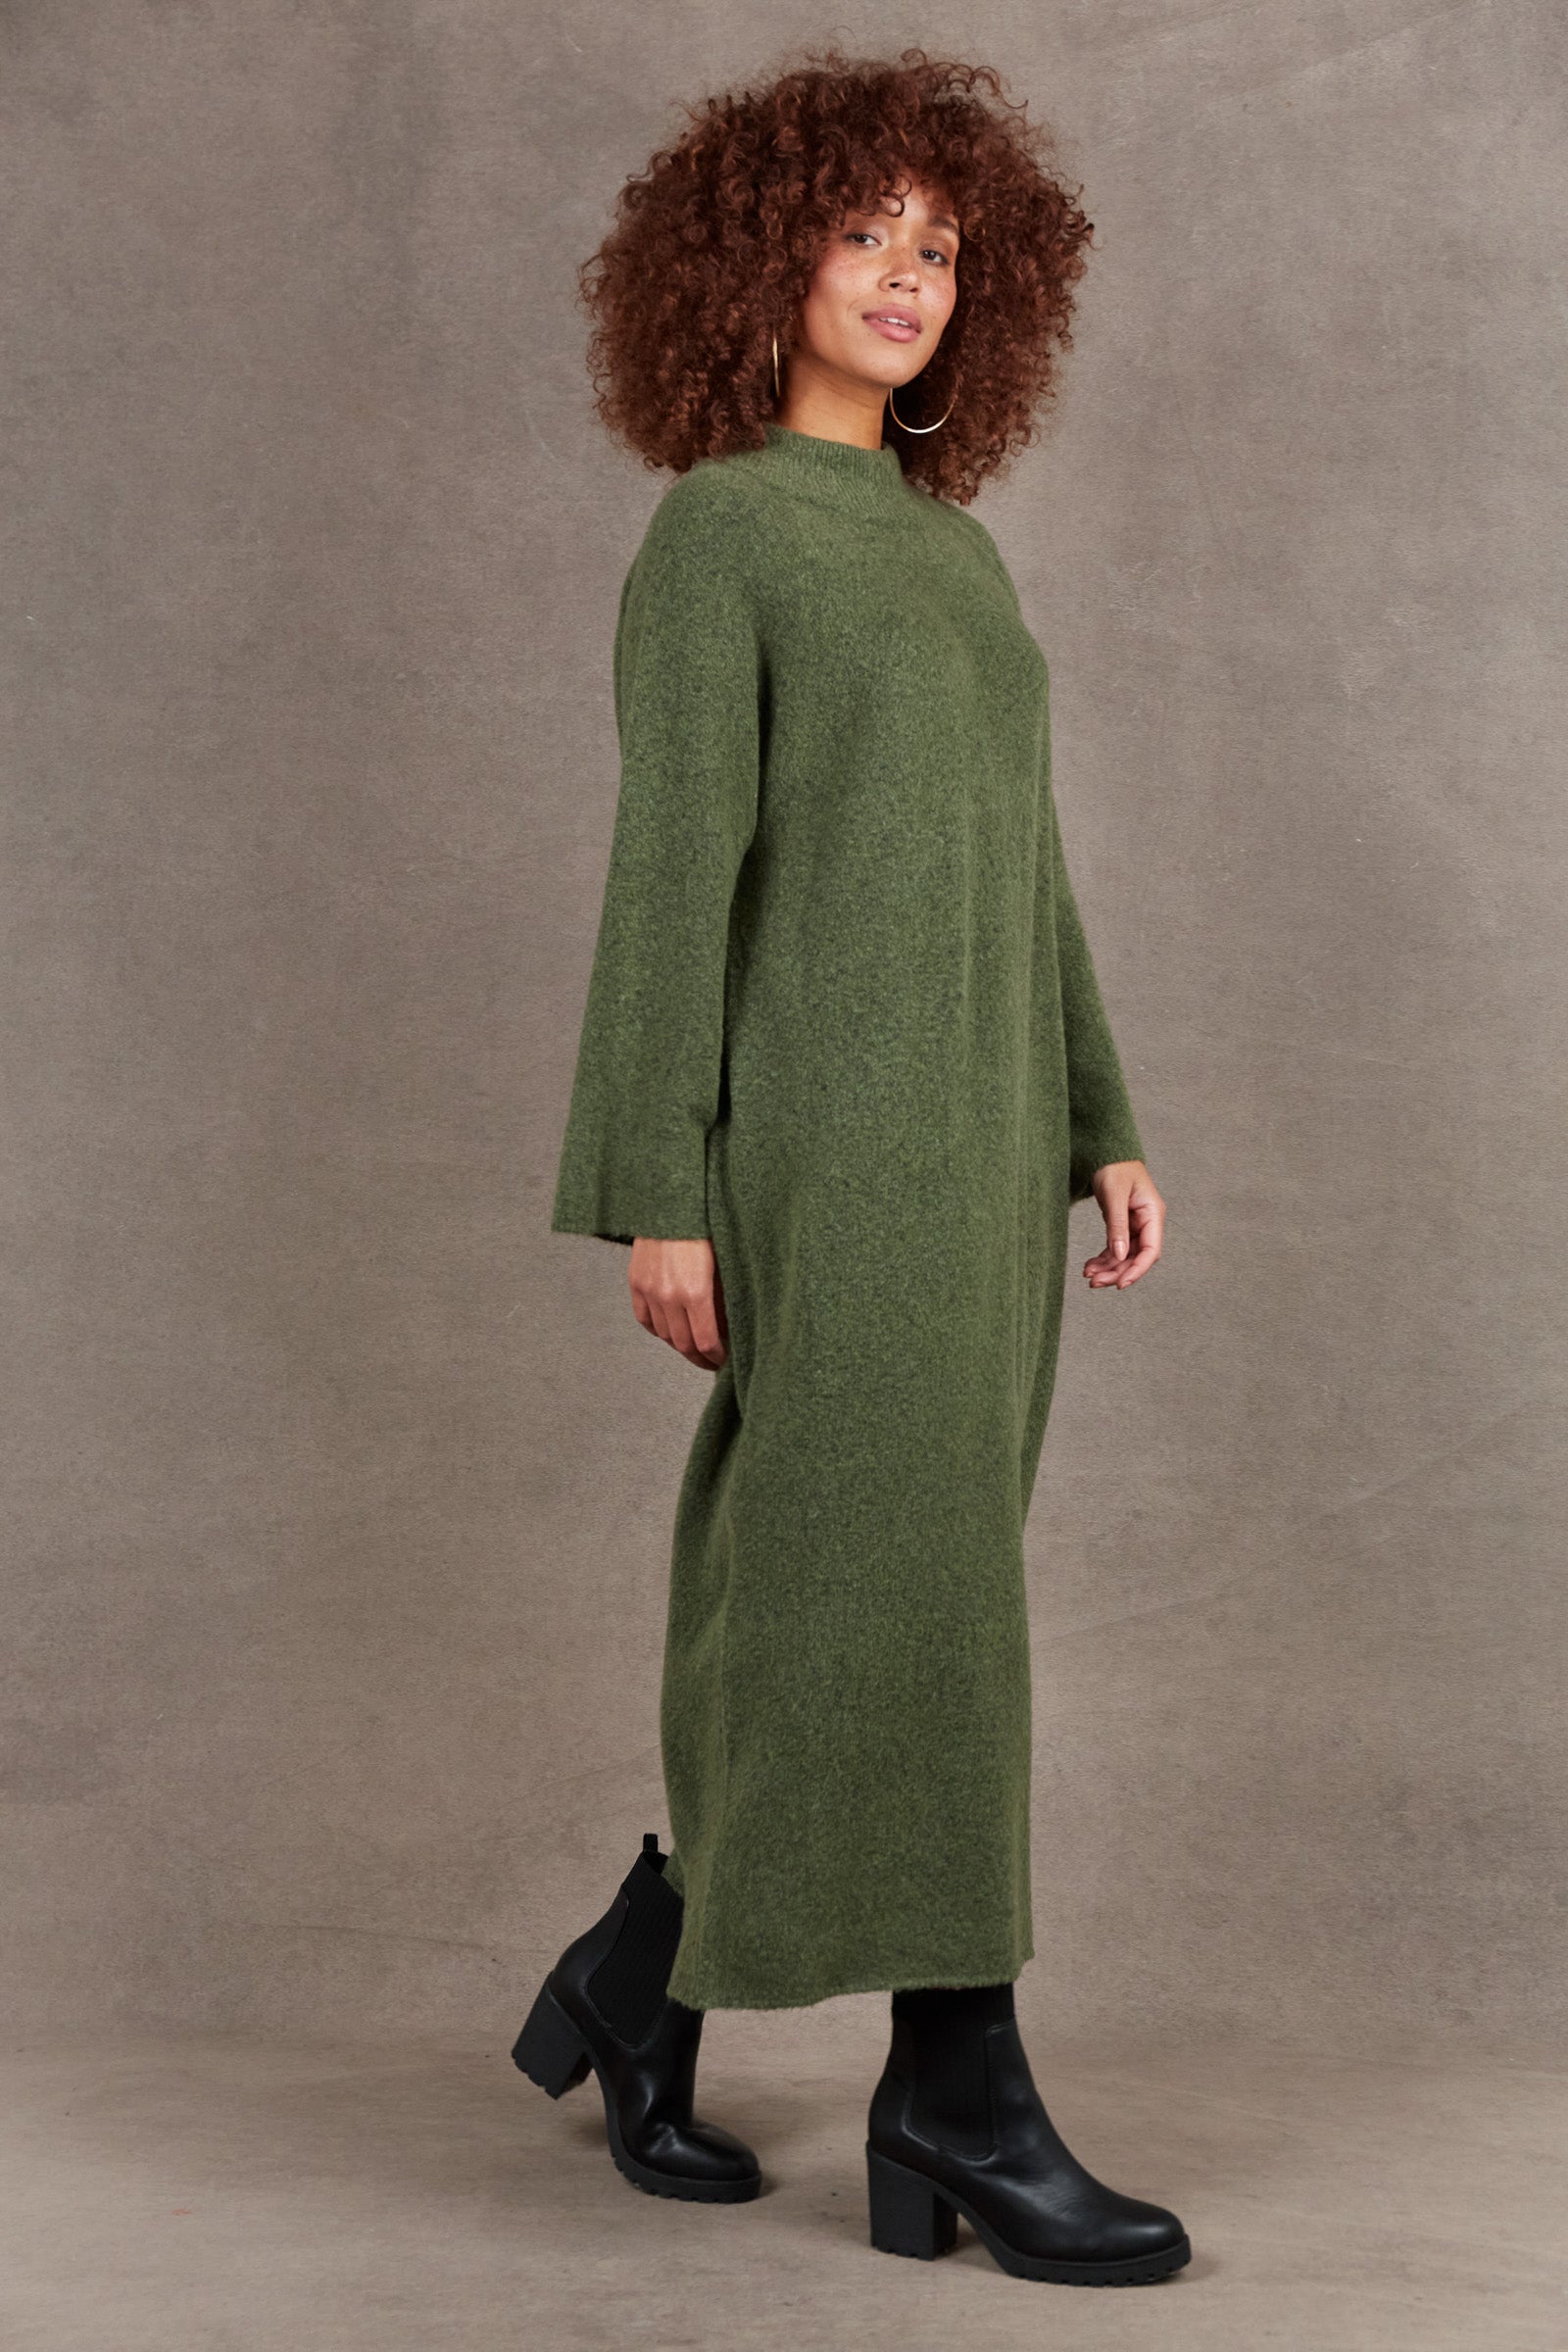 Paarl Tie Knit Dress - Moss - eb&ive Clothing - Knit Dress One Size